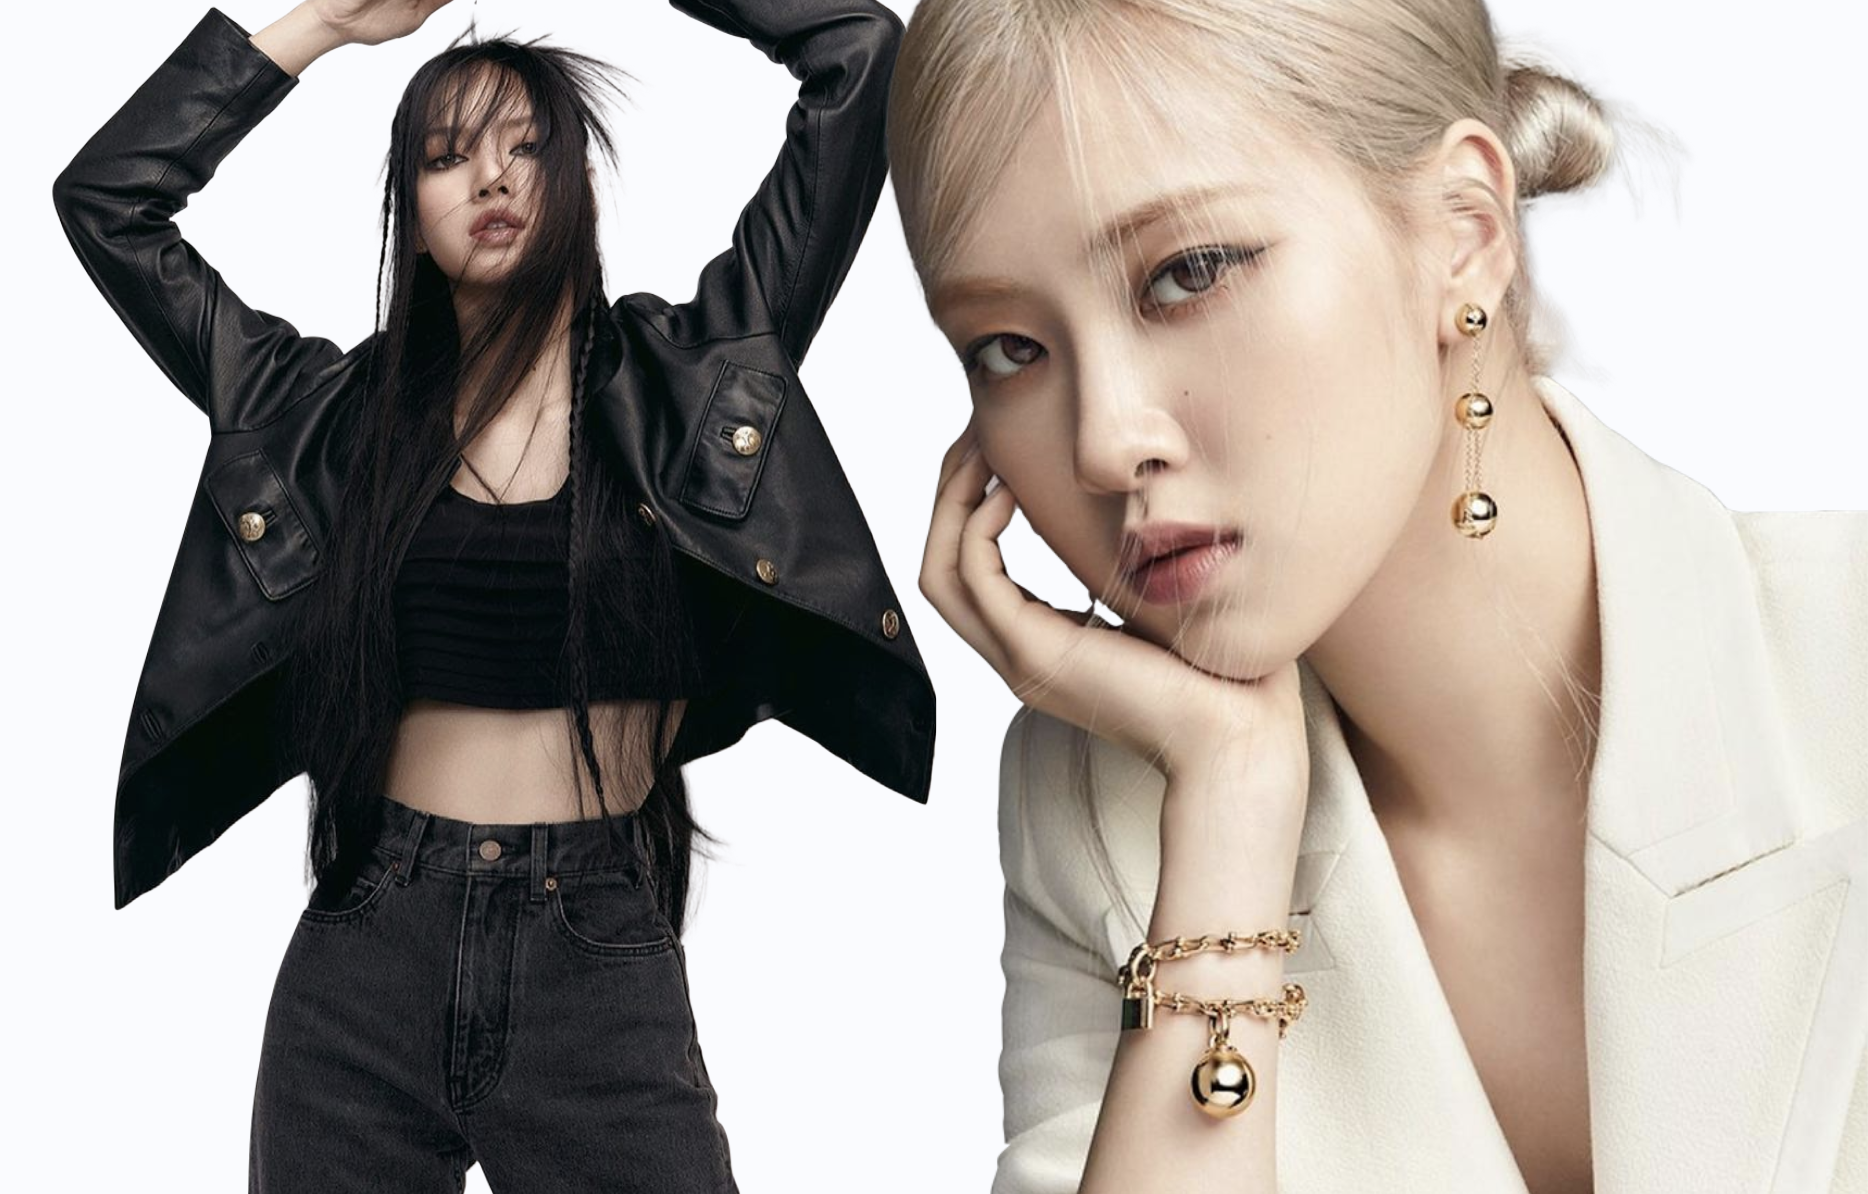 Netizens react to speculations that BLACKPINK's Lisa is dating Frédéric  Arnault, son of the LVMH group